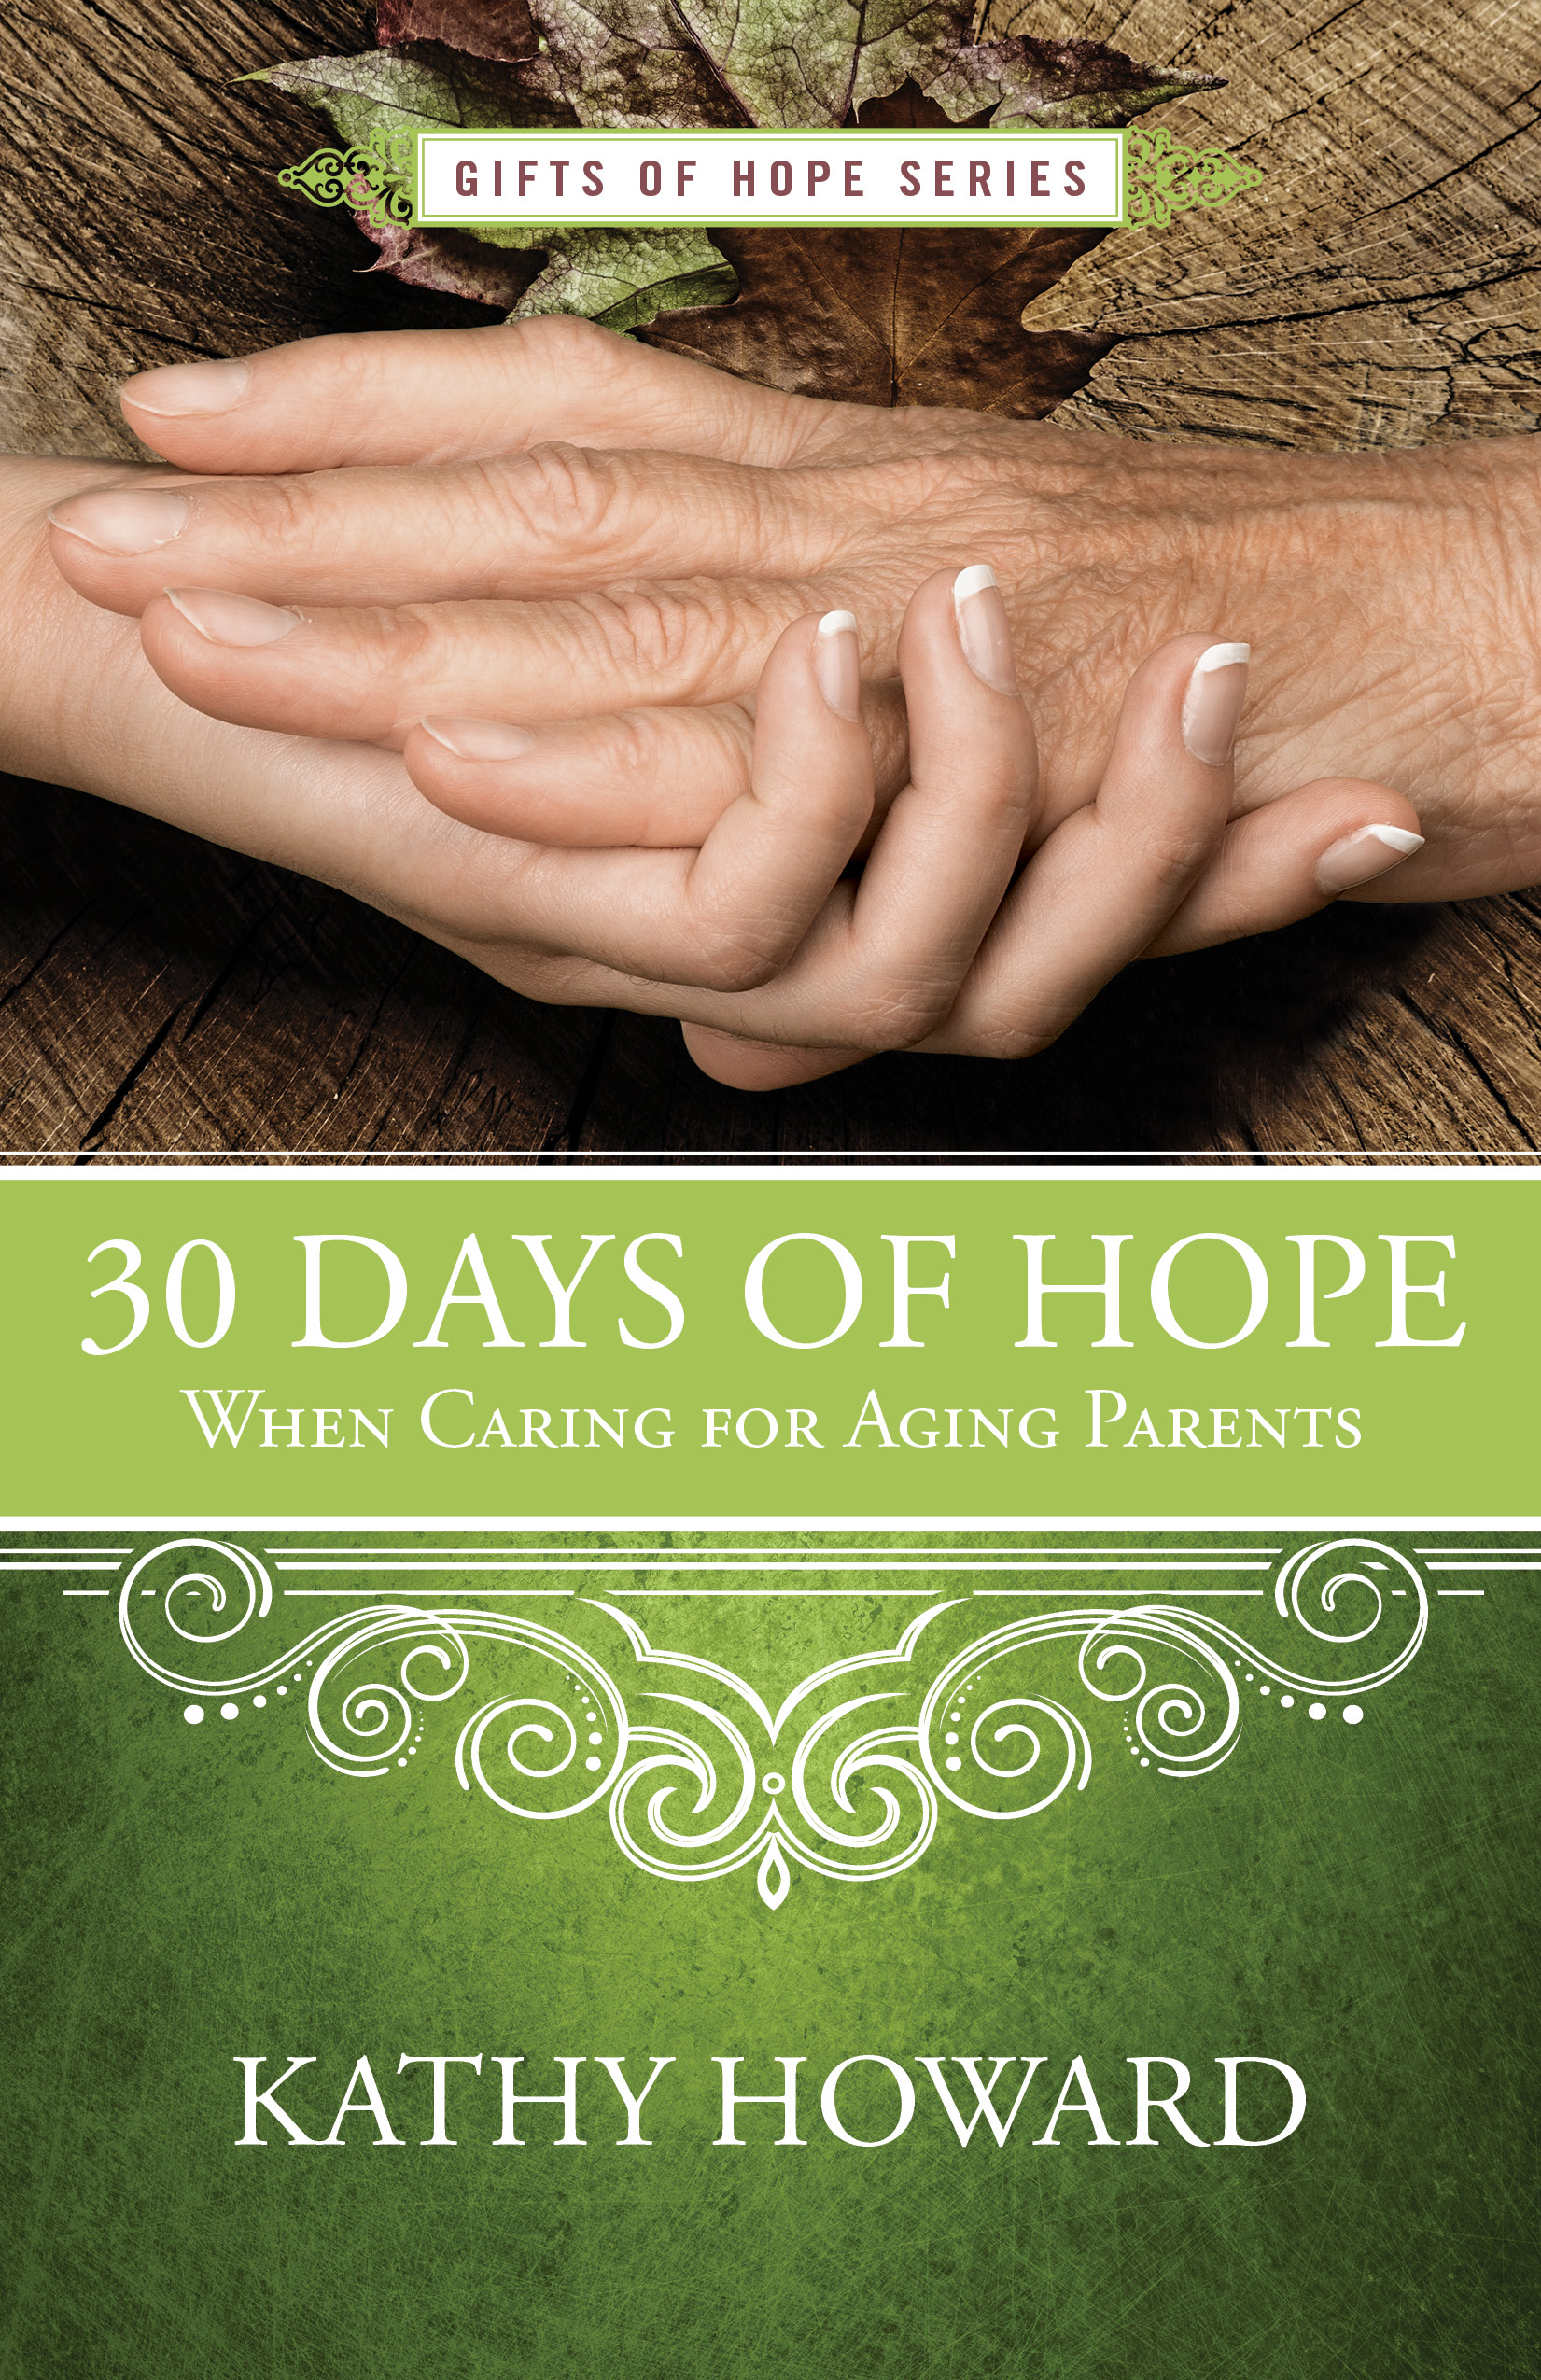 30 Days of Hope When Caring for Aging Parents - Read and Excerpt of Kathy Howard's newest book on DoNotDepart.com